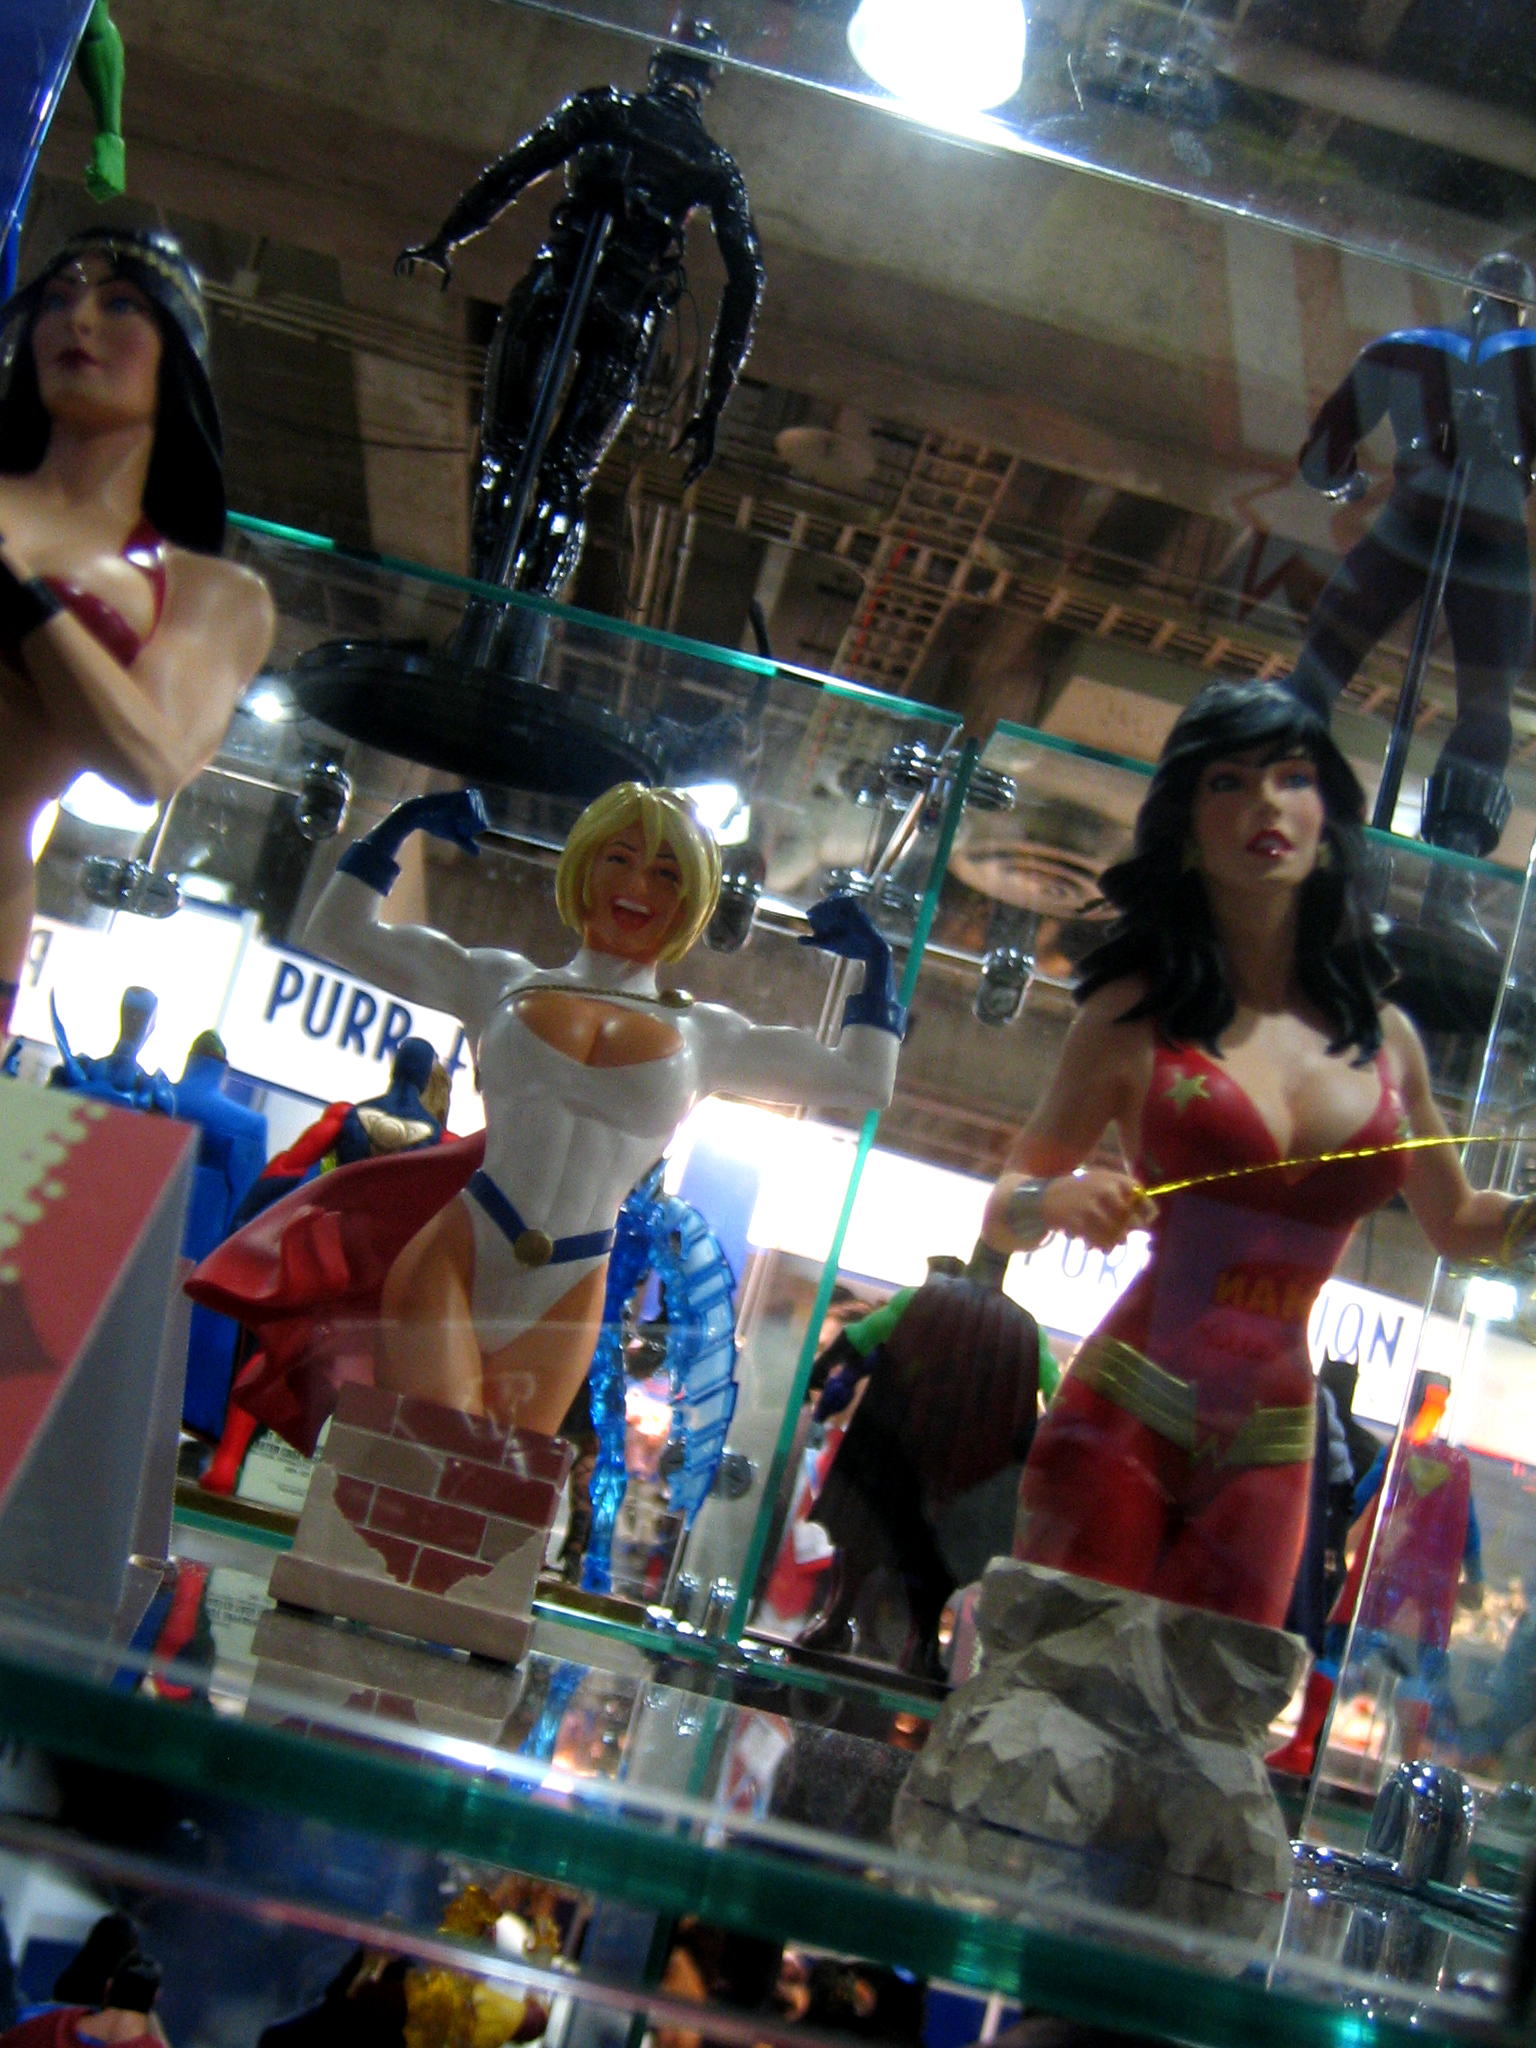 two toy figurines and one figurine are on display